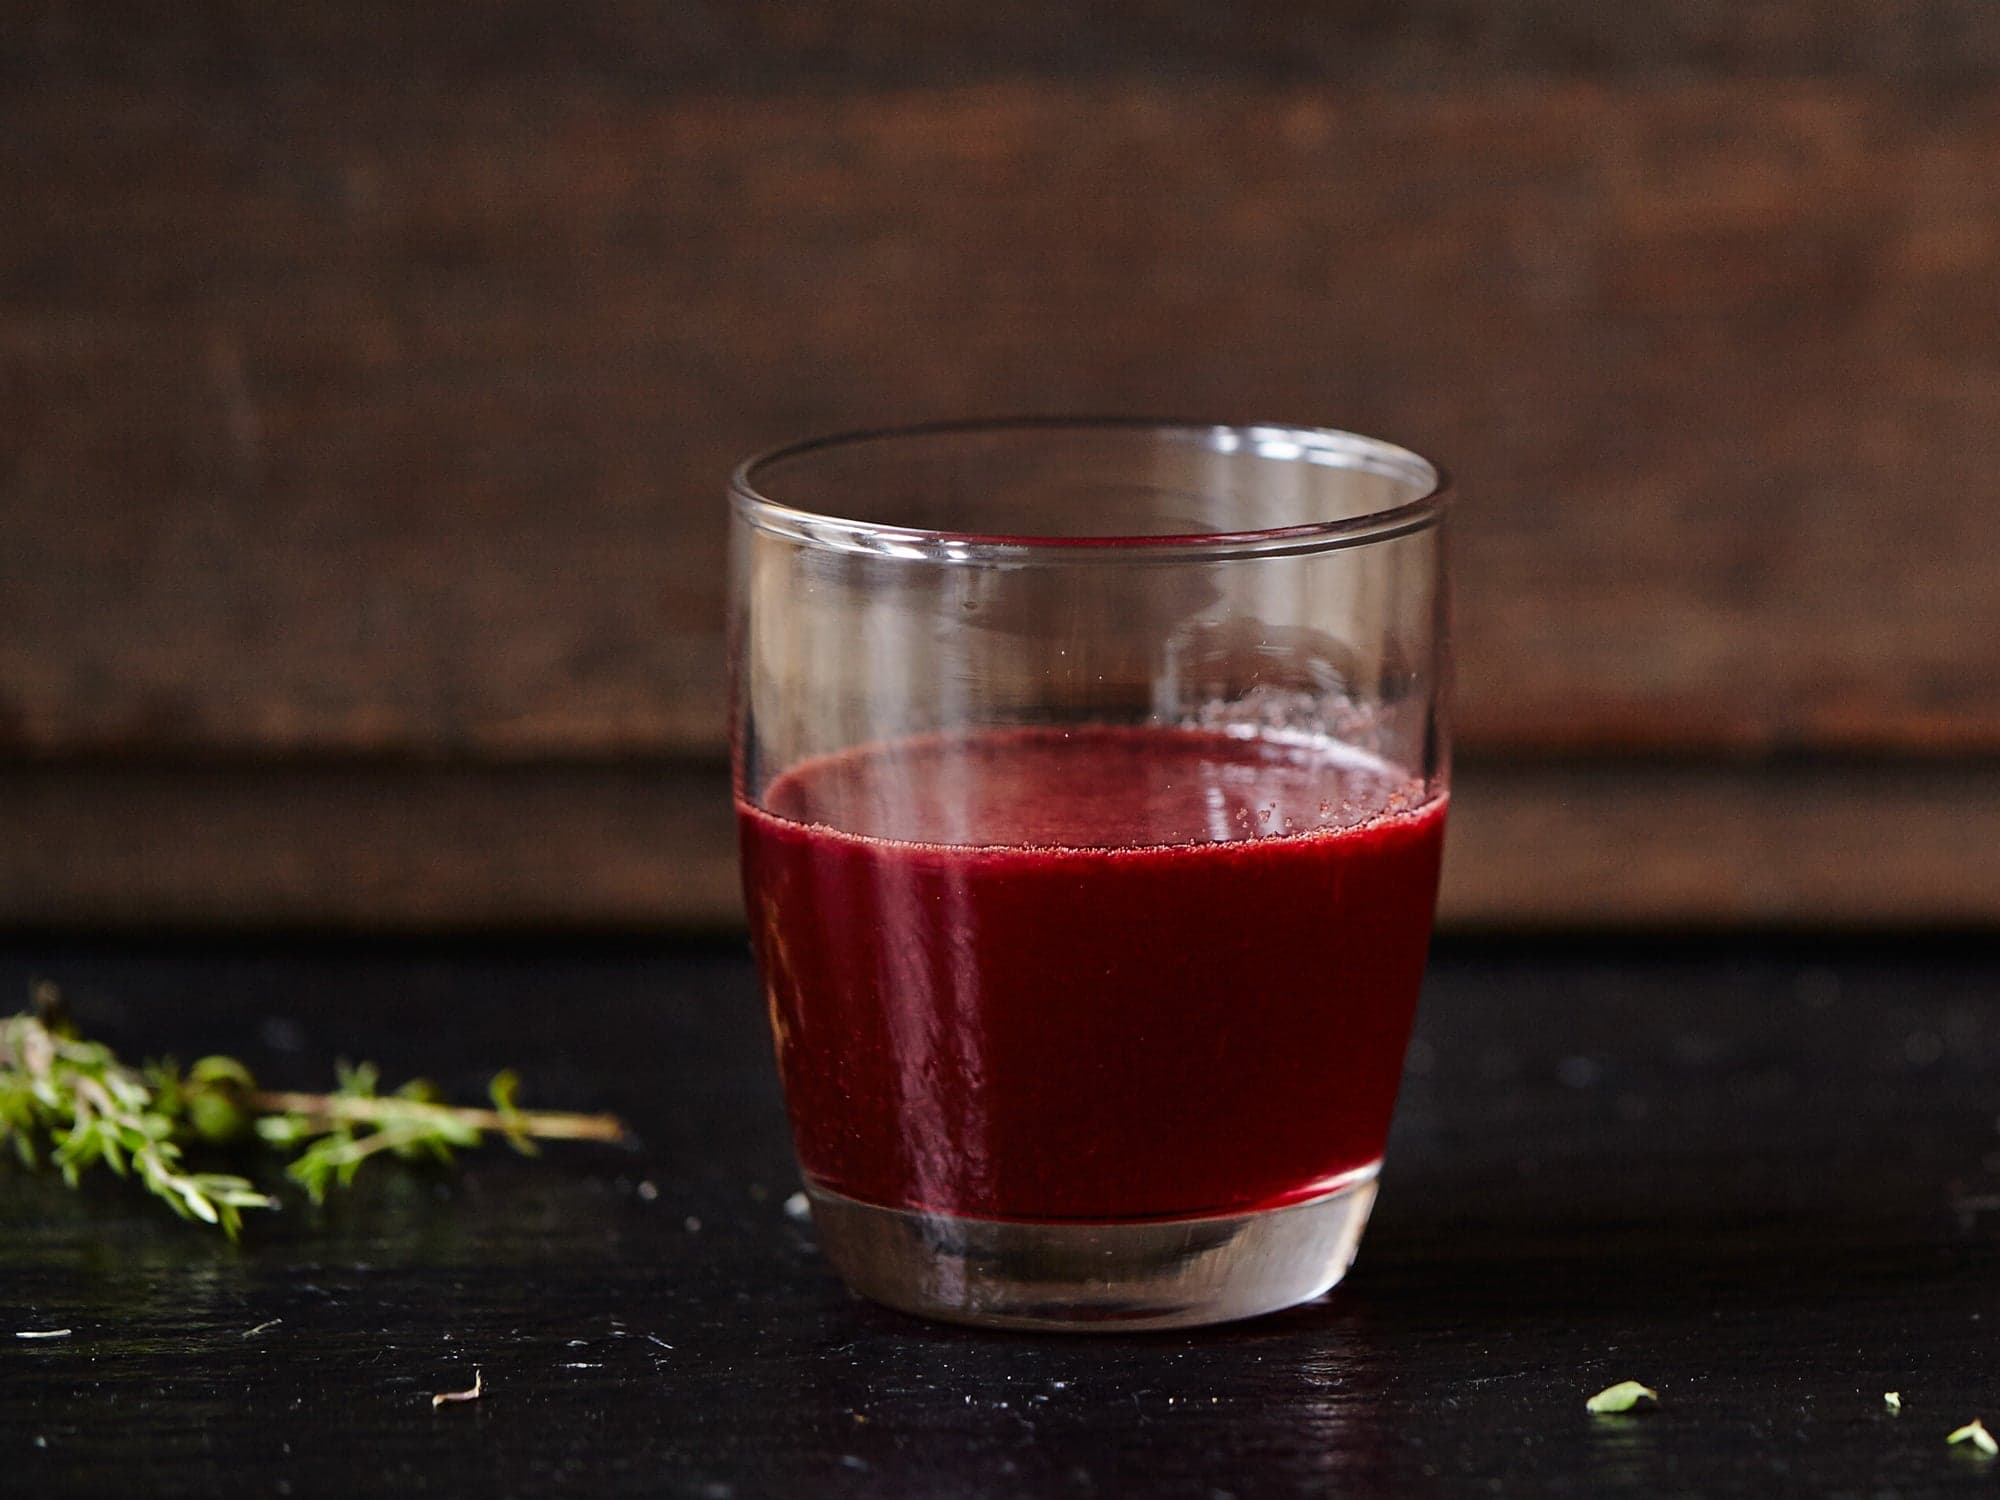 Thyme To Beet It with Beet Syrup